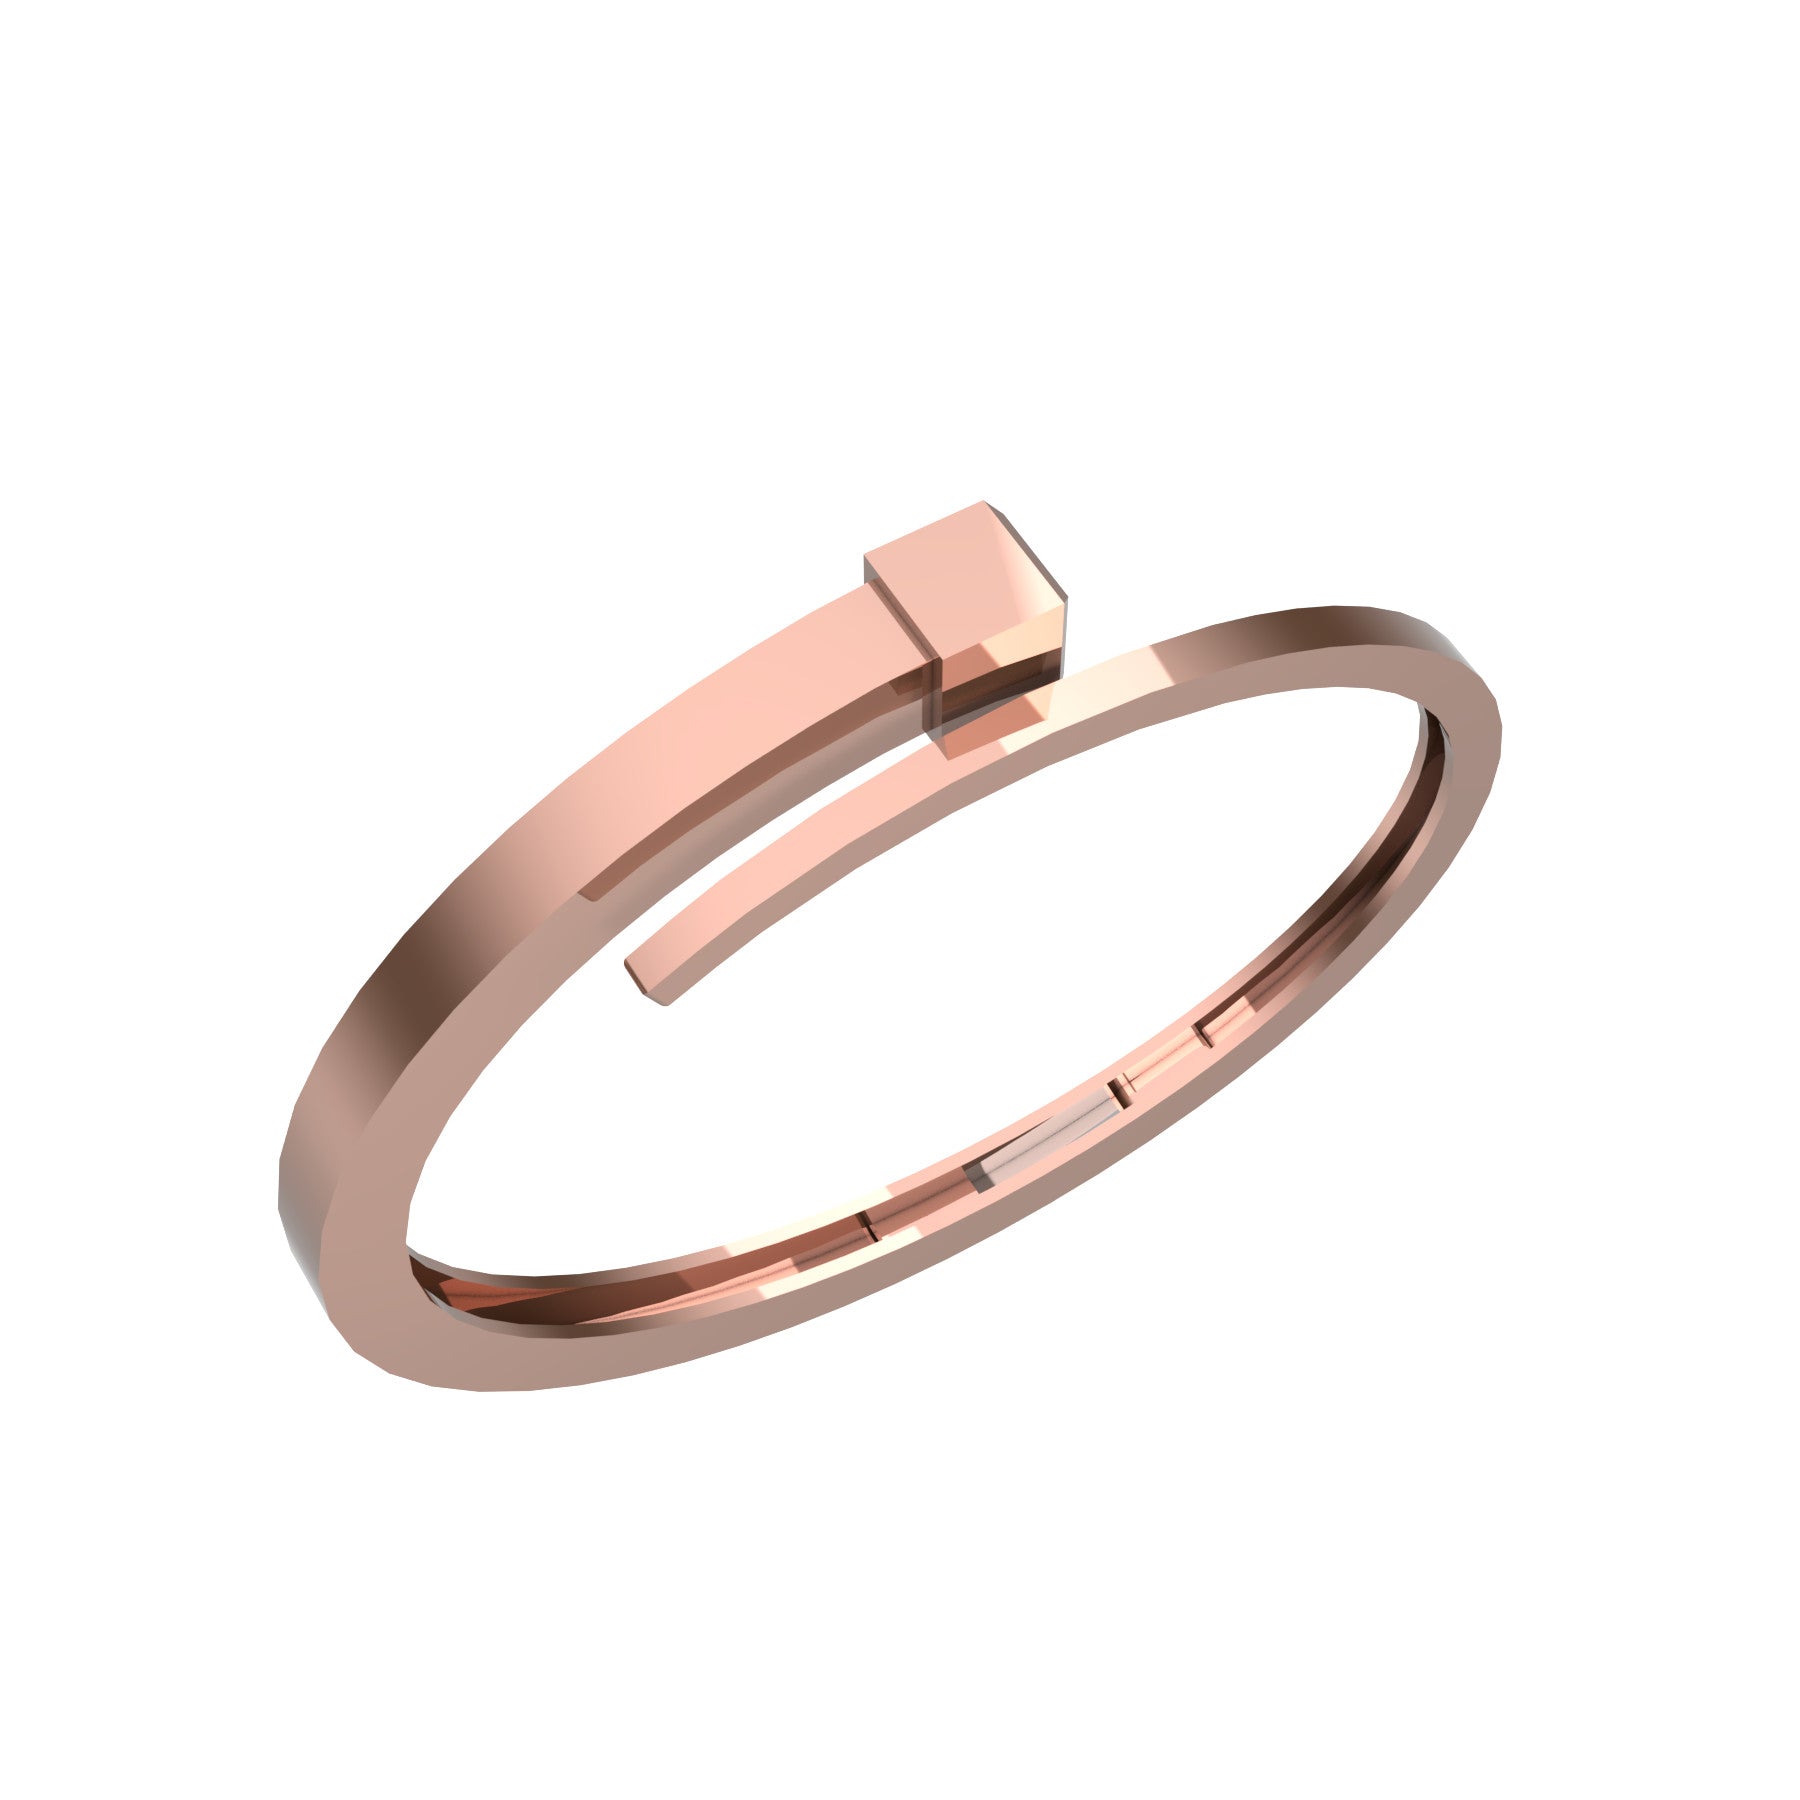 lucky nail bracelet, 18 K pink gold, weight about 32,8 to 49,4 g (1.16 to 1.74 oz), width 8 mm max